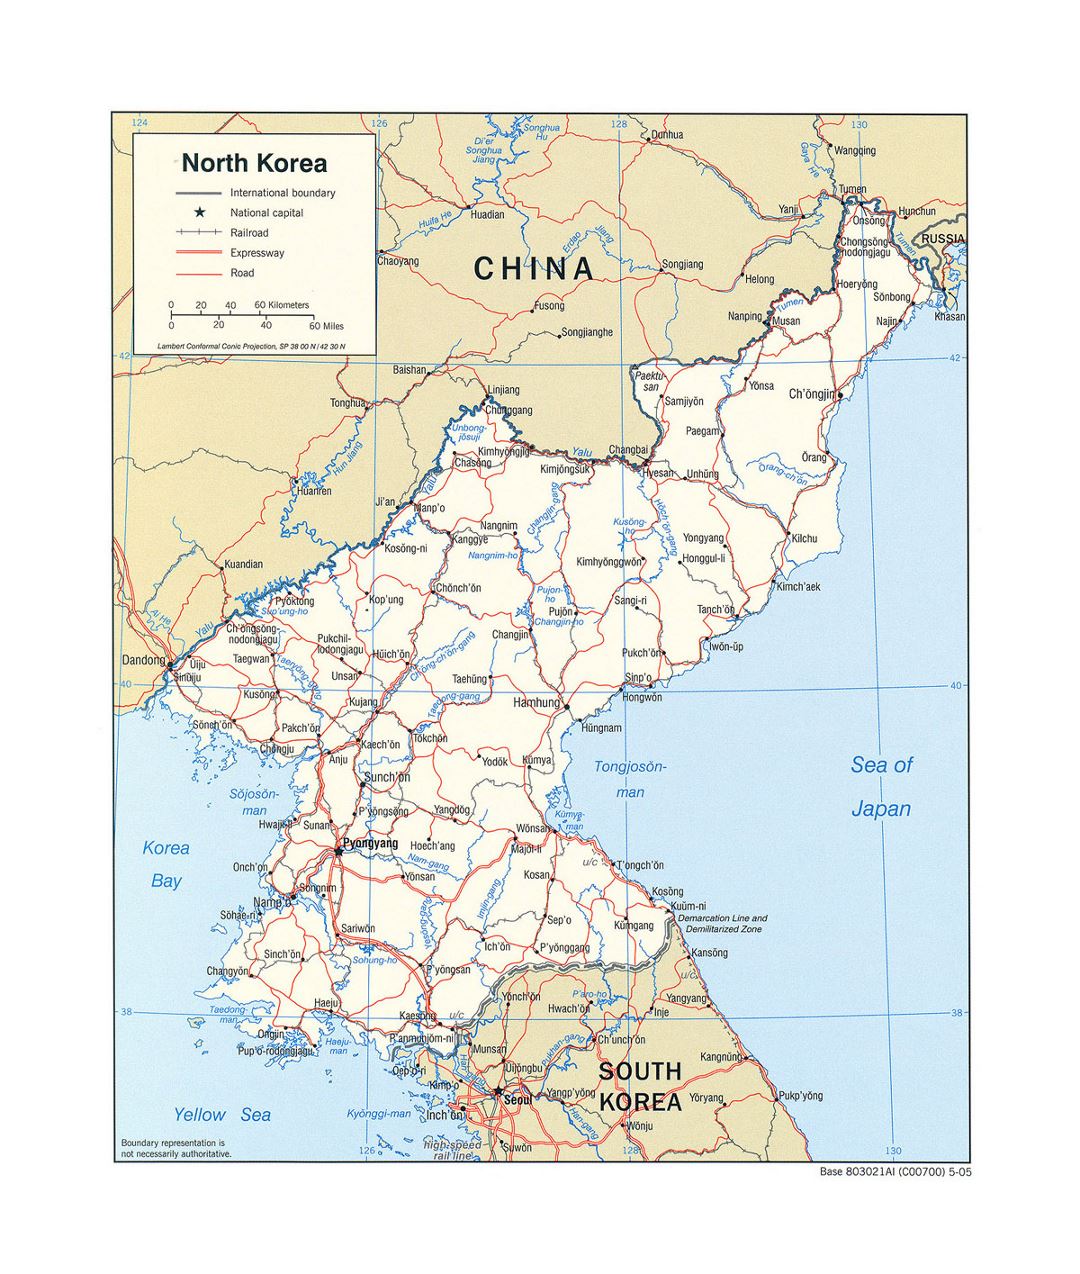 Detailed political map of North Korea with roads, railroads and major cities - 2005